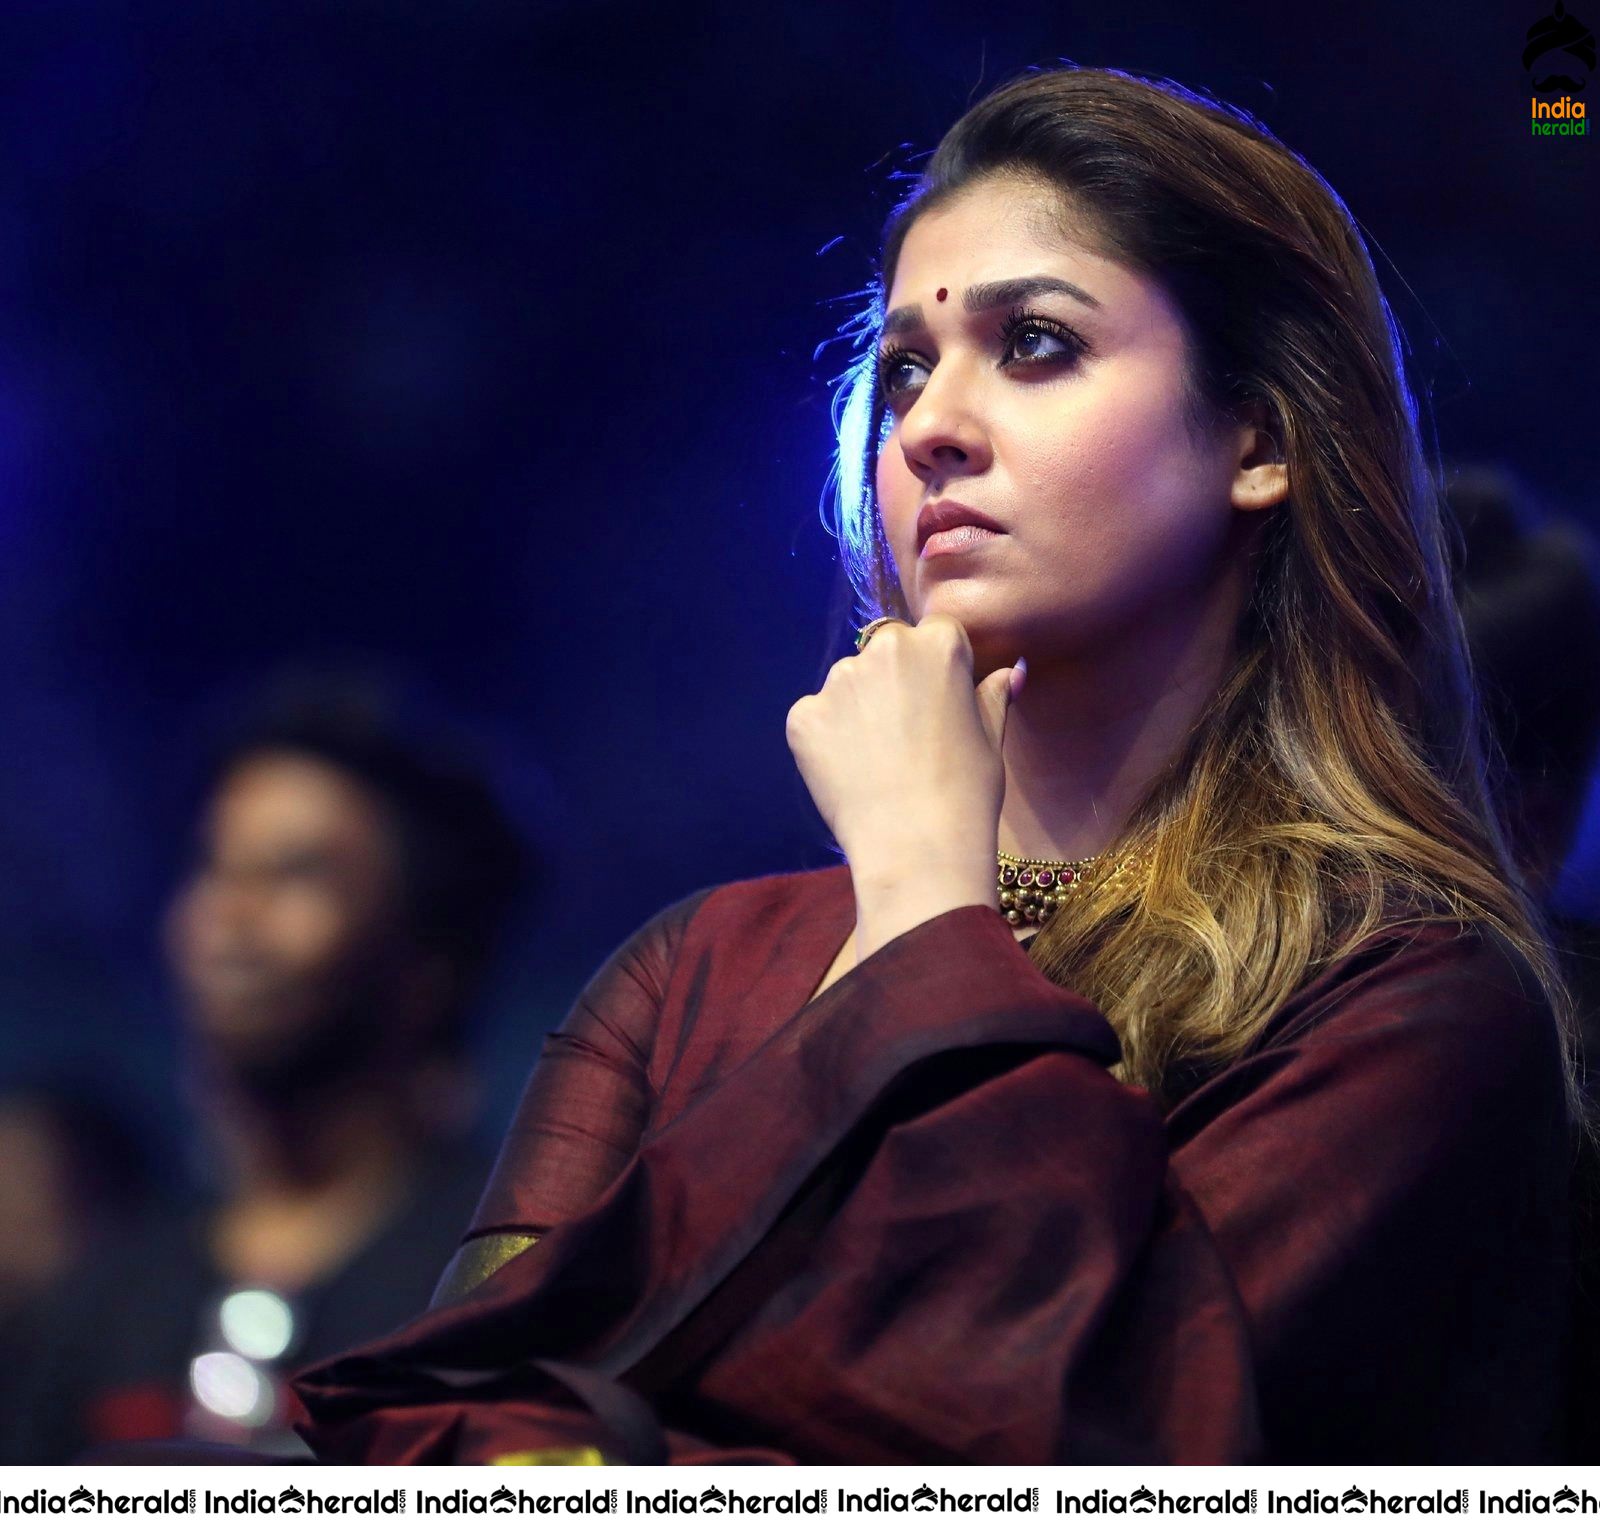 More Photos of Nayanthara from Zee Awards